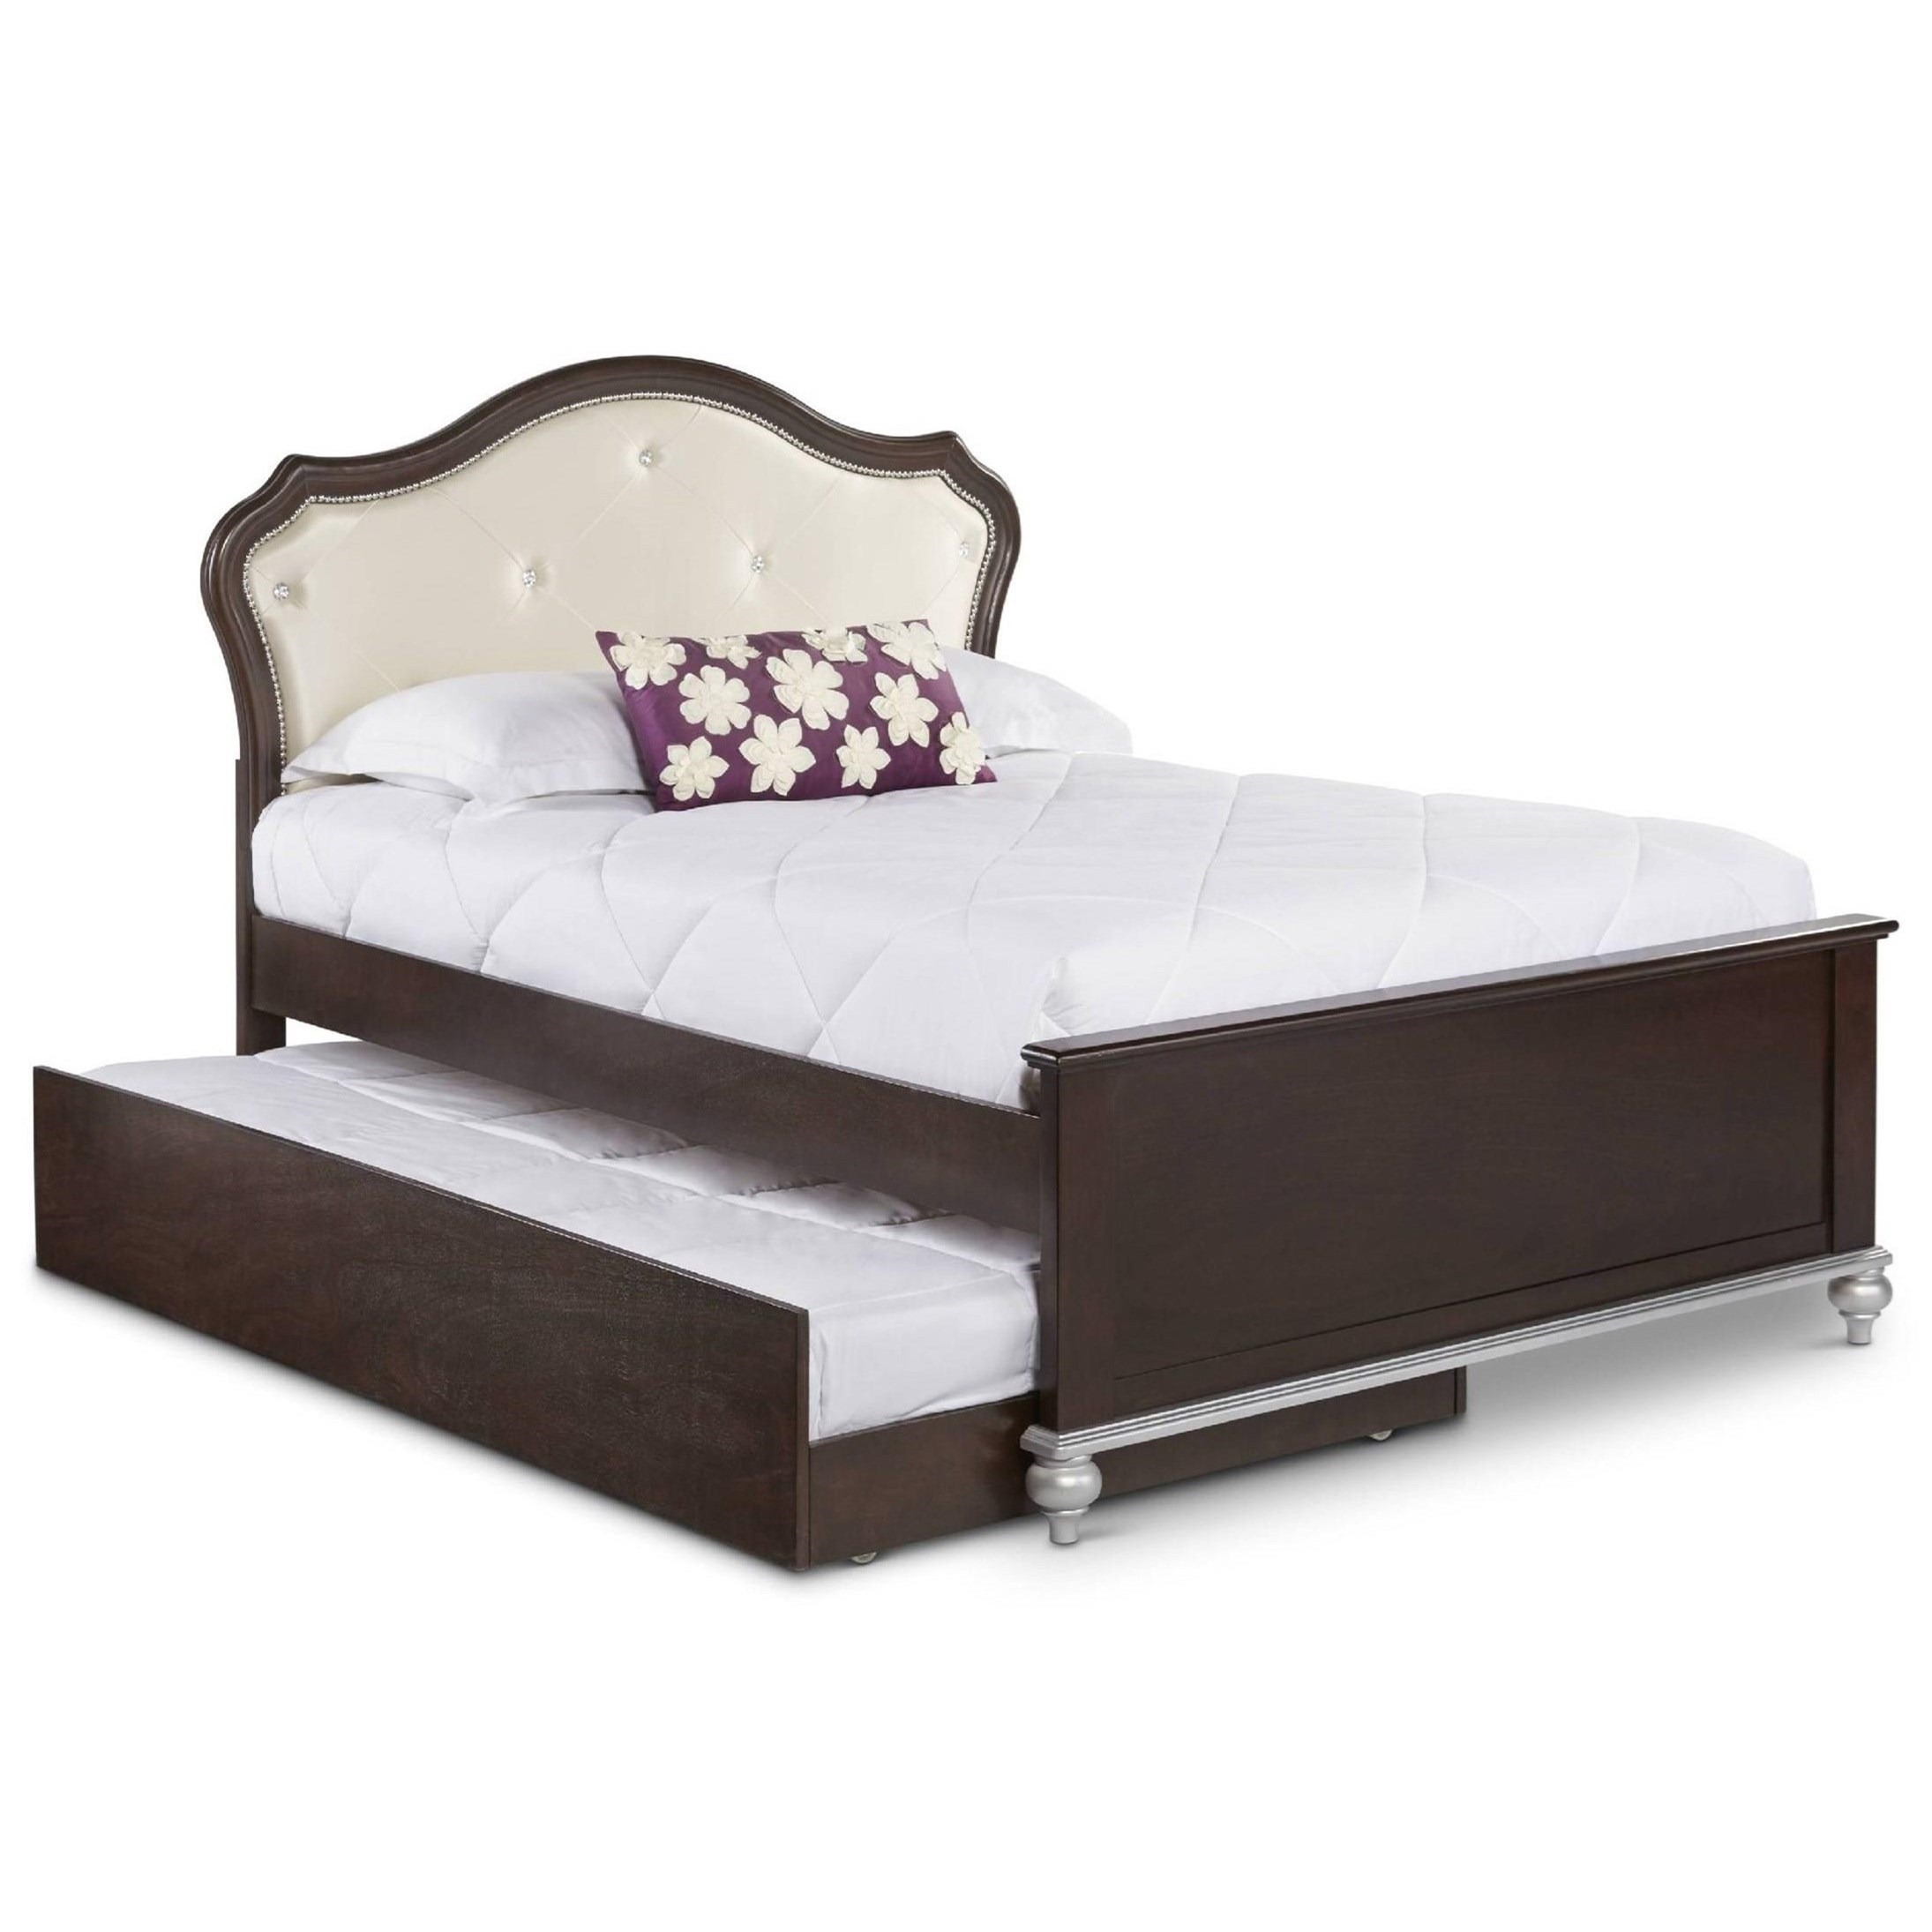 Elements International Allison Full Bed With Glamorous - Bed Frame , HD Wallpaper & Backgrounds